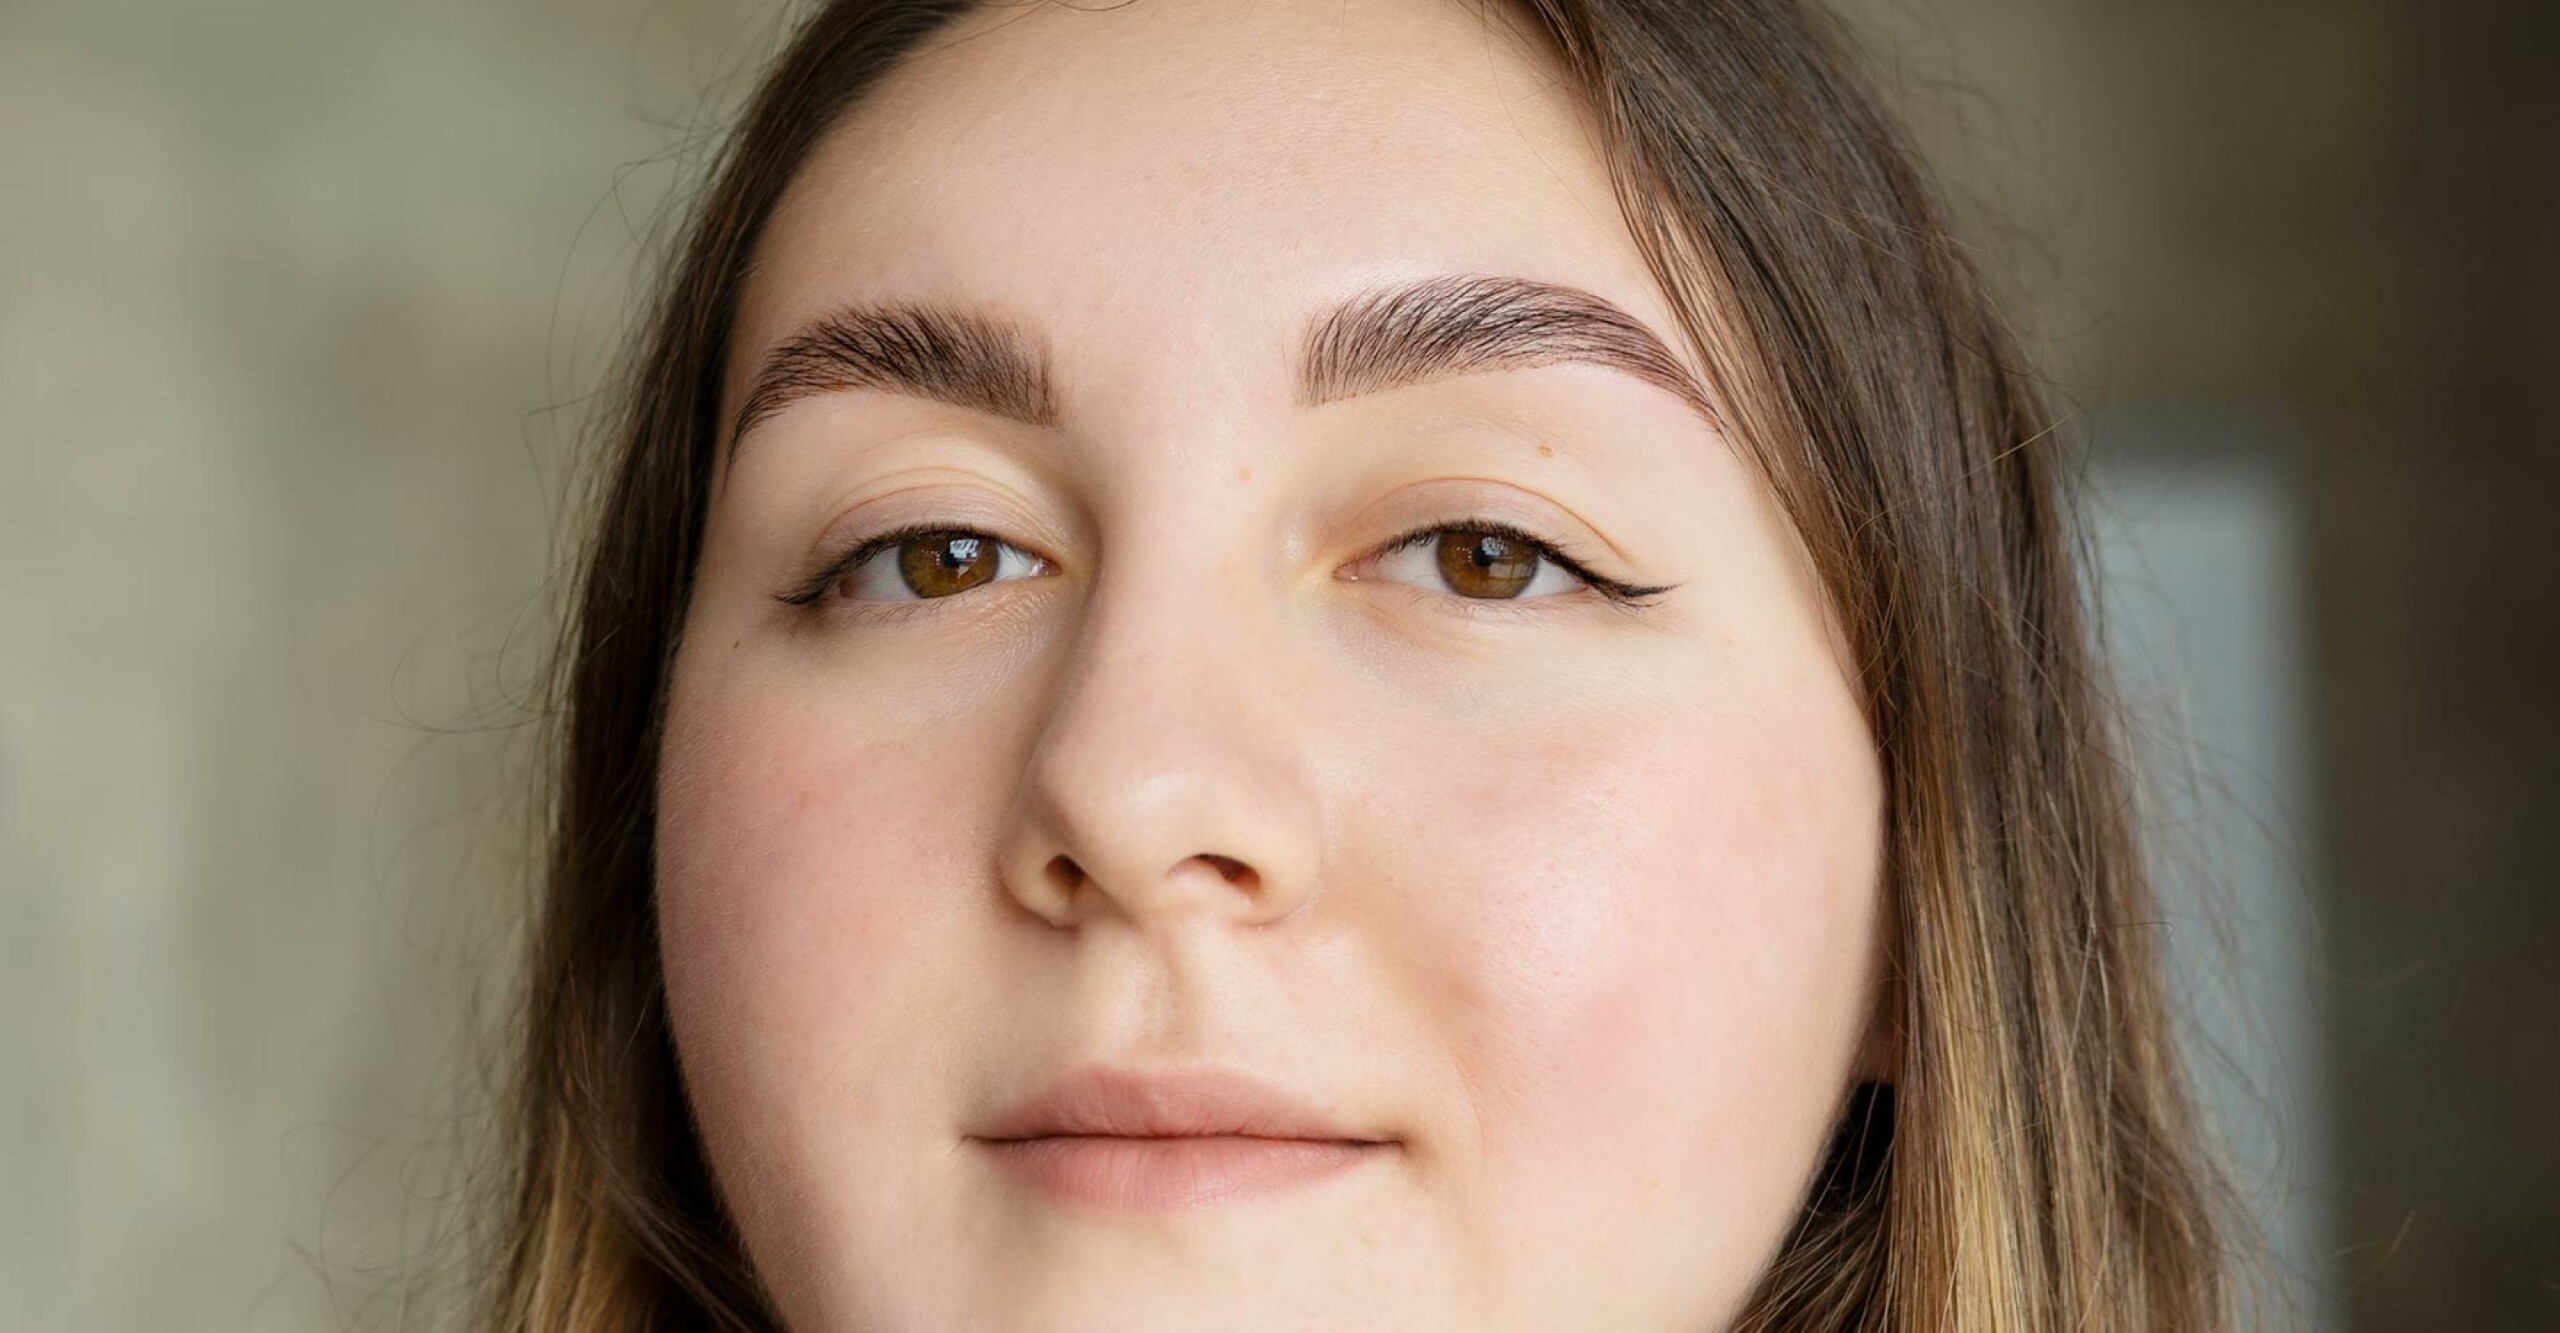 close up on person’s face with laminated brows, long eyelashes, and brunette hair